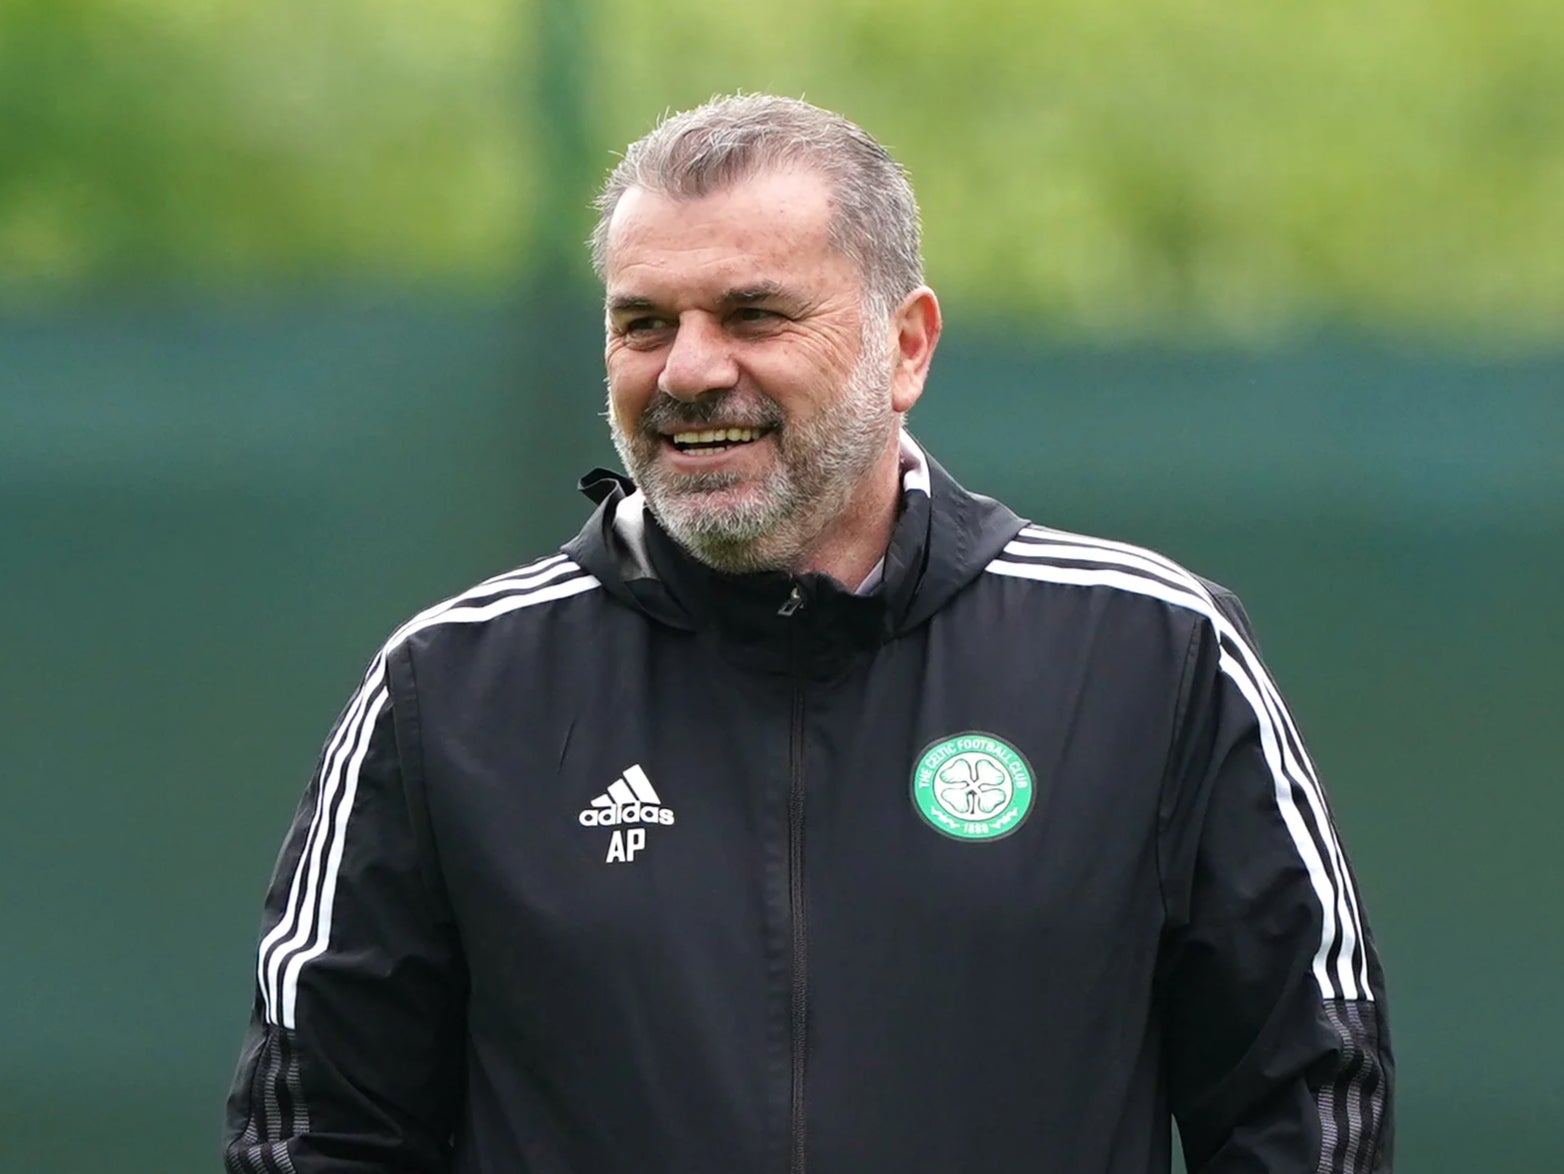 Celtic manager Ange Postecoglou is looking forward to a Champions League campaign